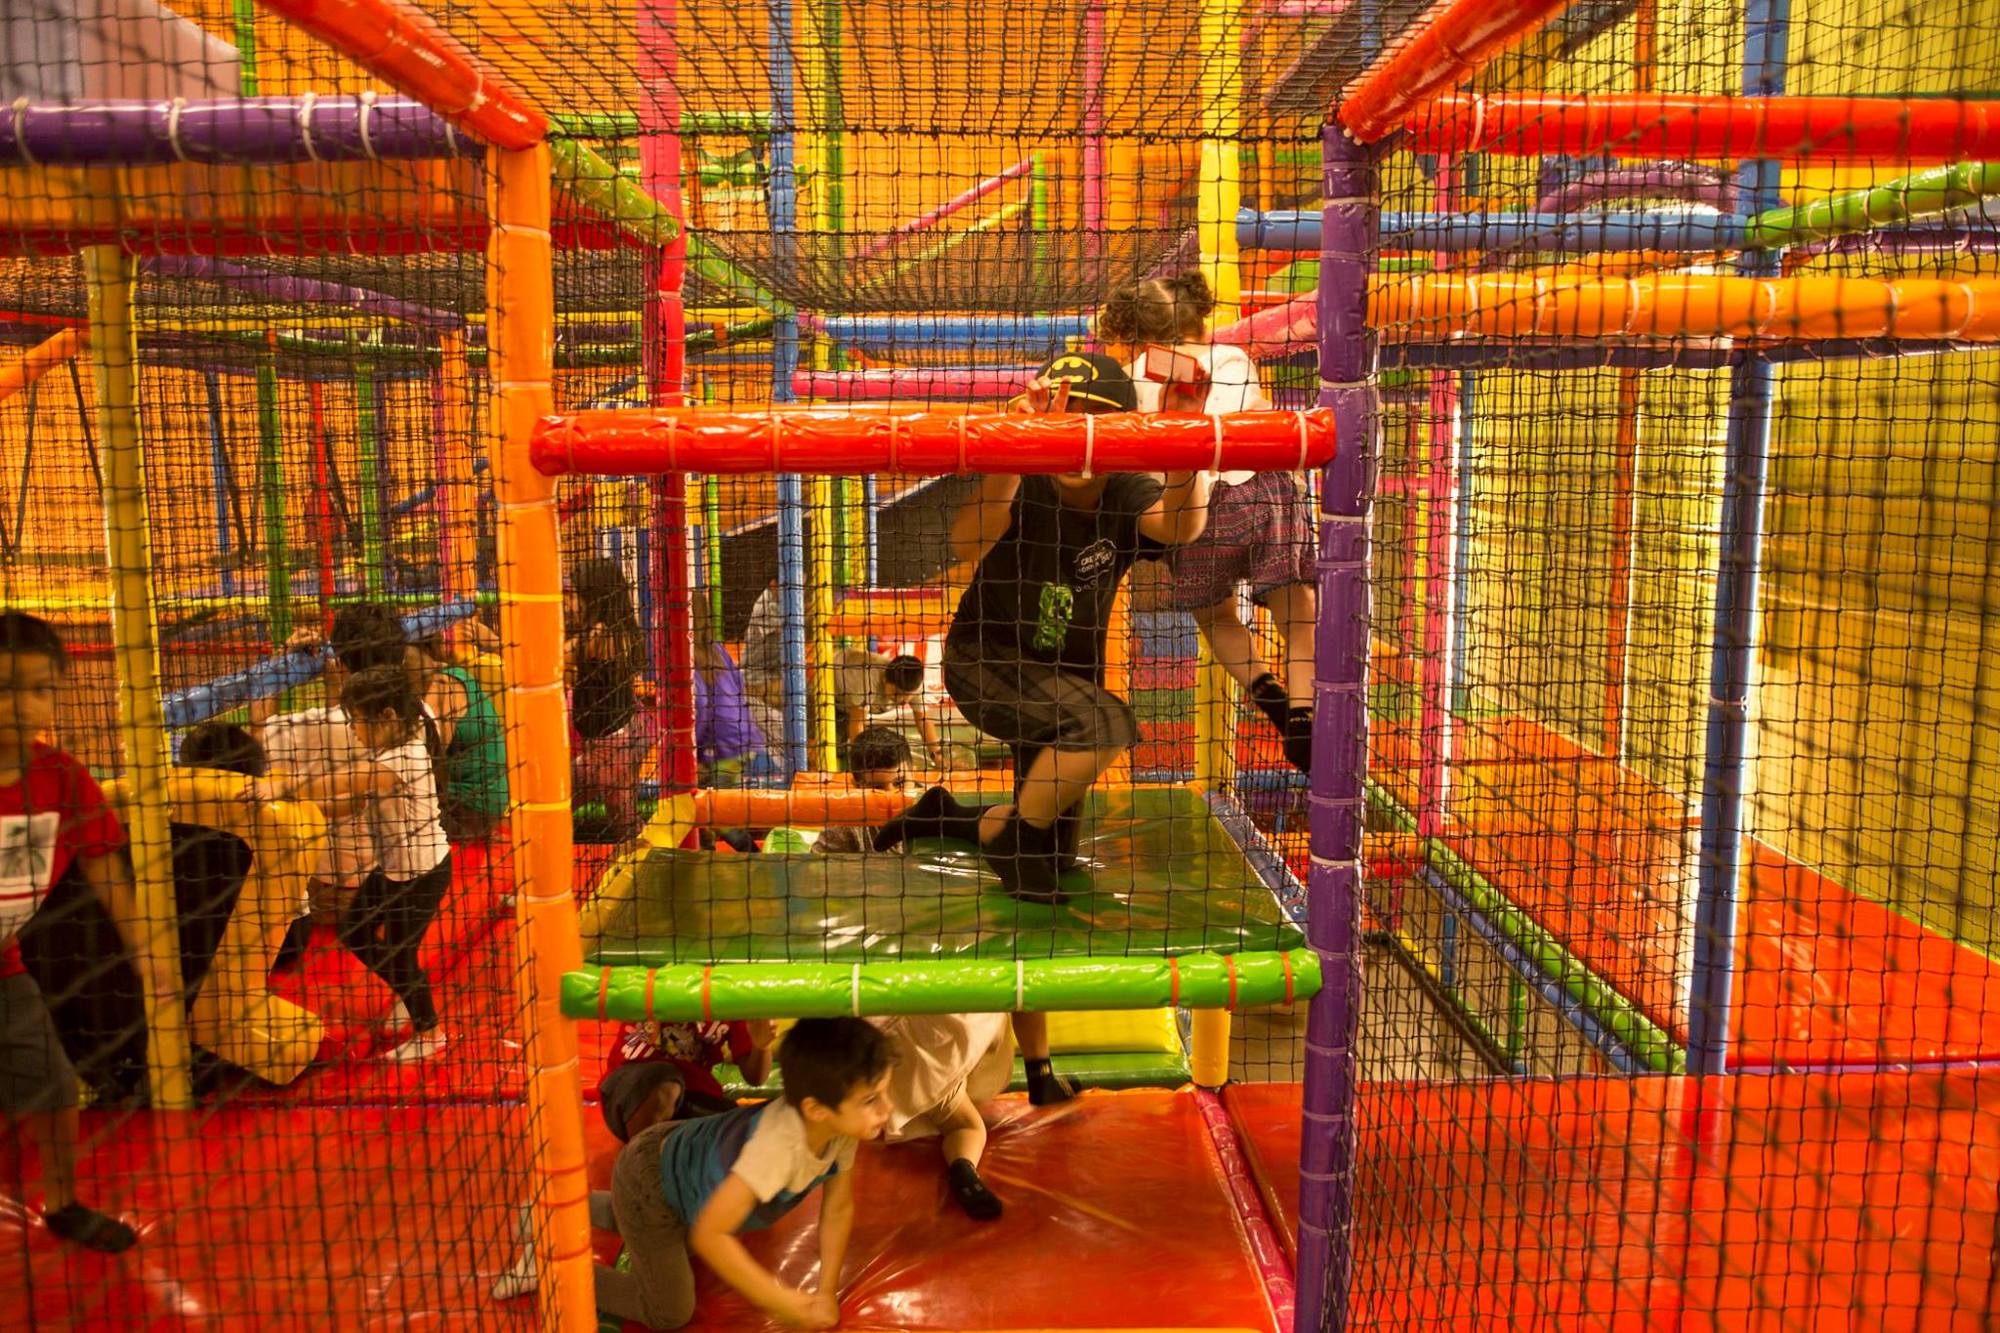 Kids Empire offers climbing walls, mazes, play structures, spinning, sliding, a block area and a ball pit.